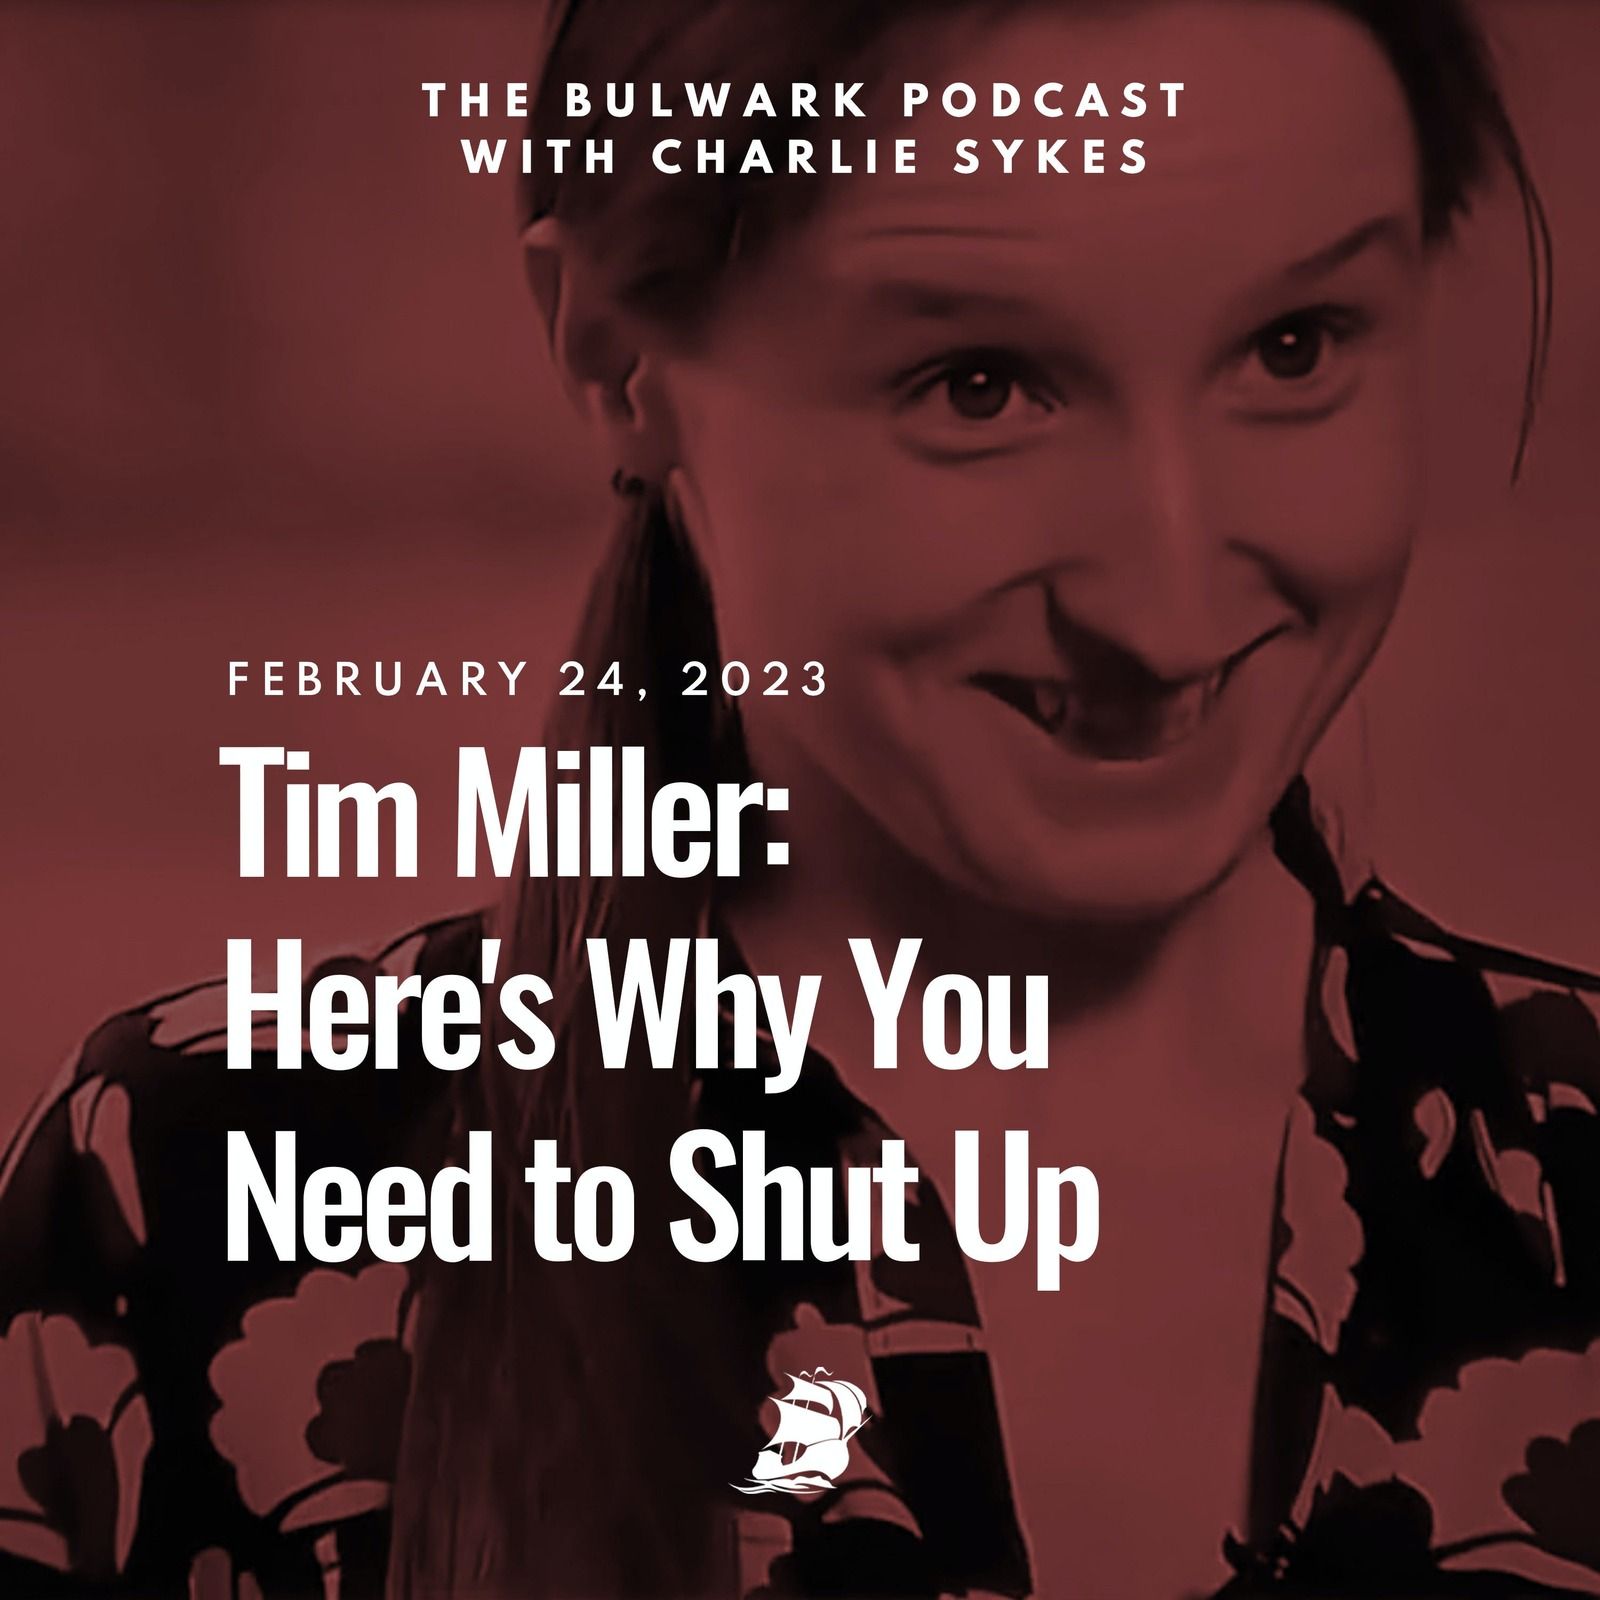 Tim Miller: Here's Why You Need to Shut Up